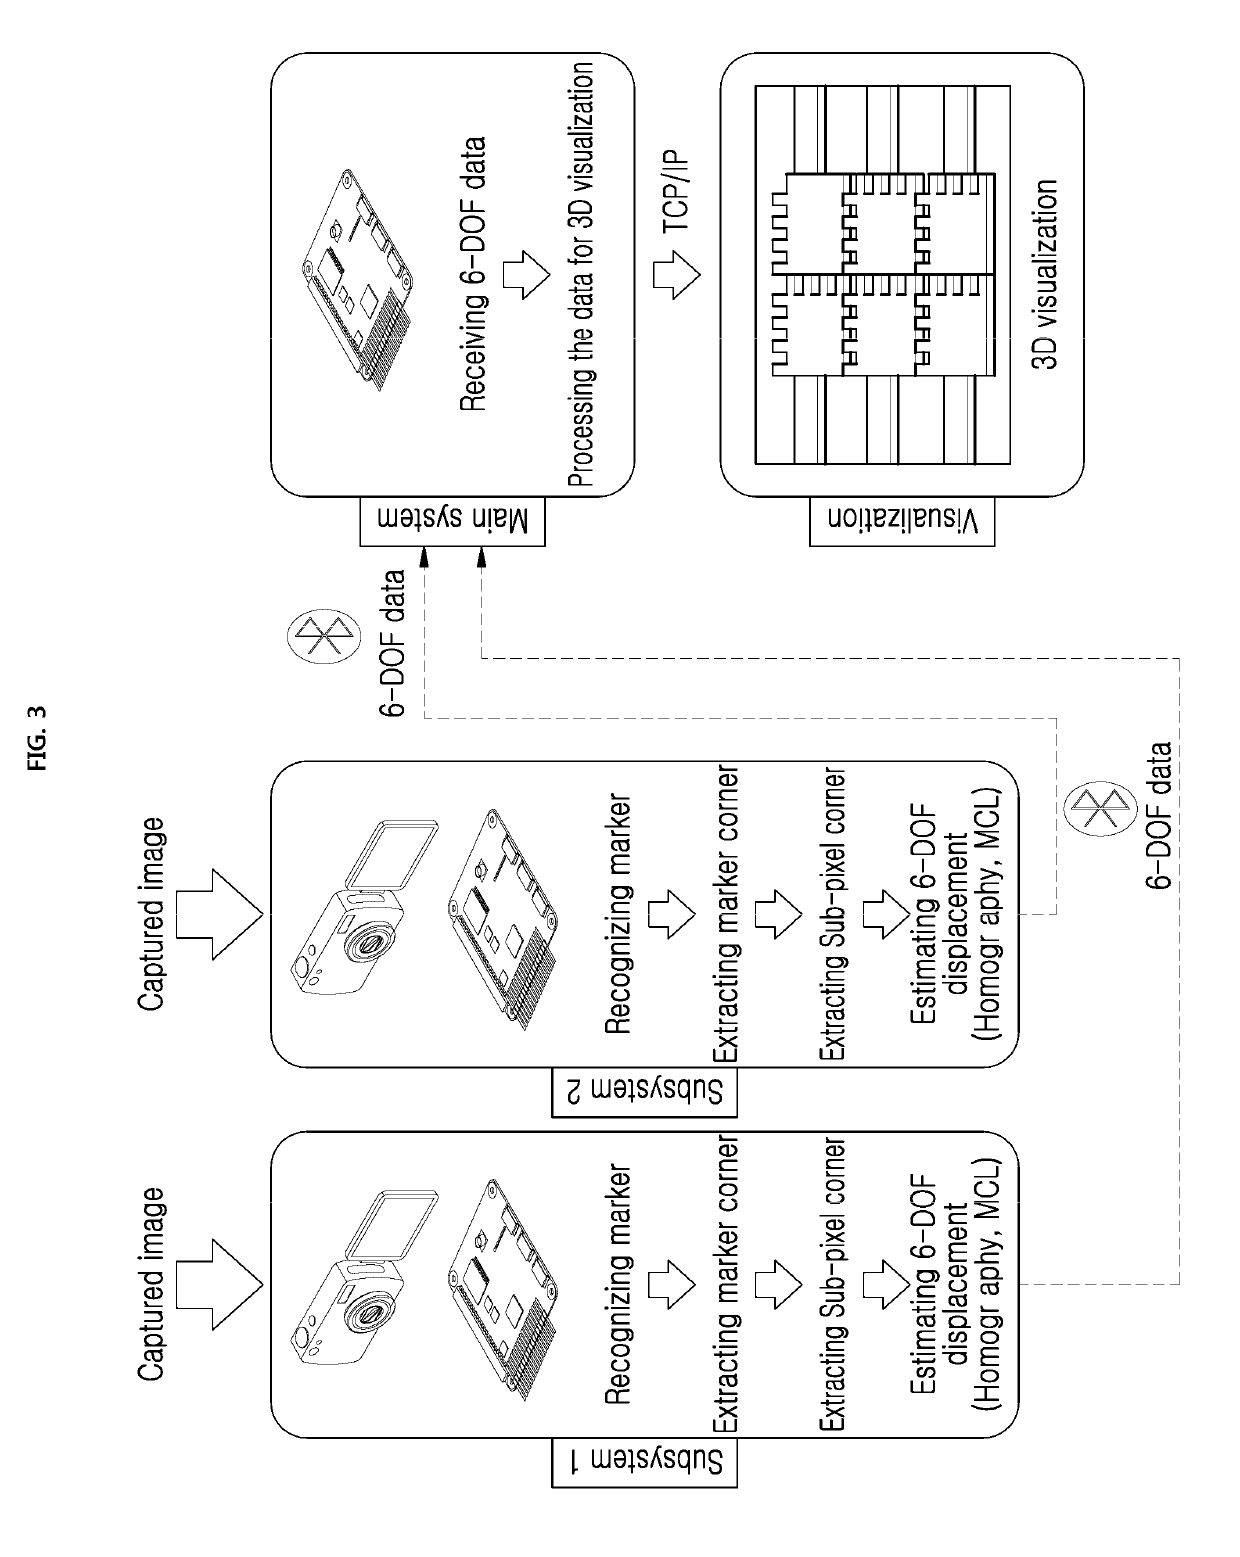 Method for estimating 6-dof relative displacement using vision-based localization and apparatus therefor